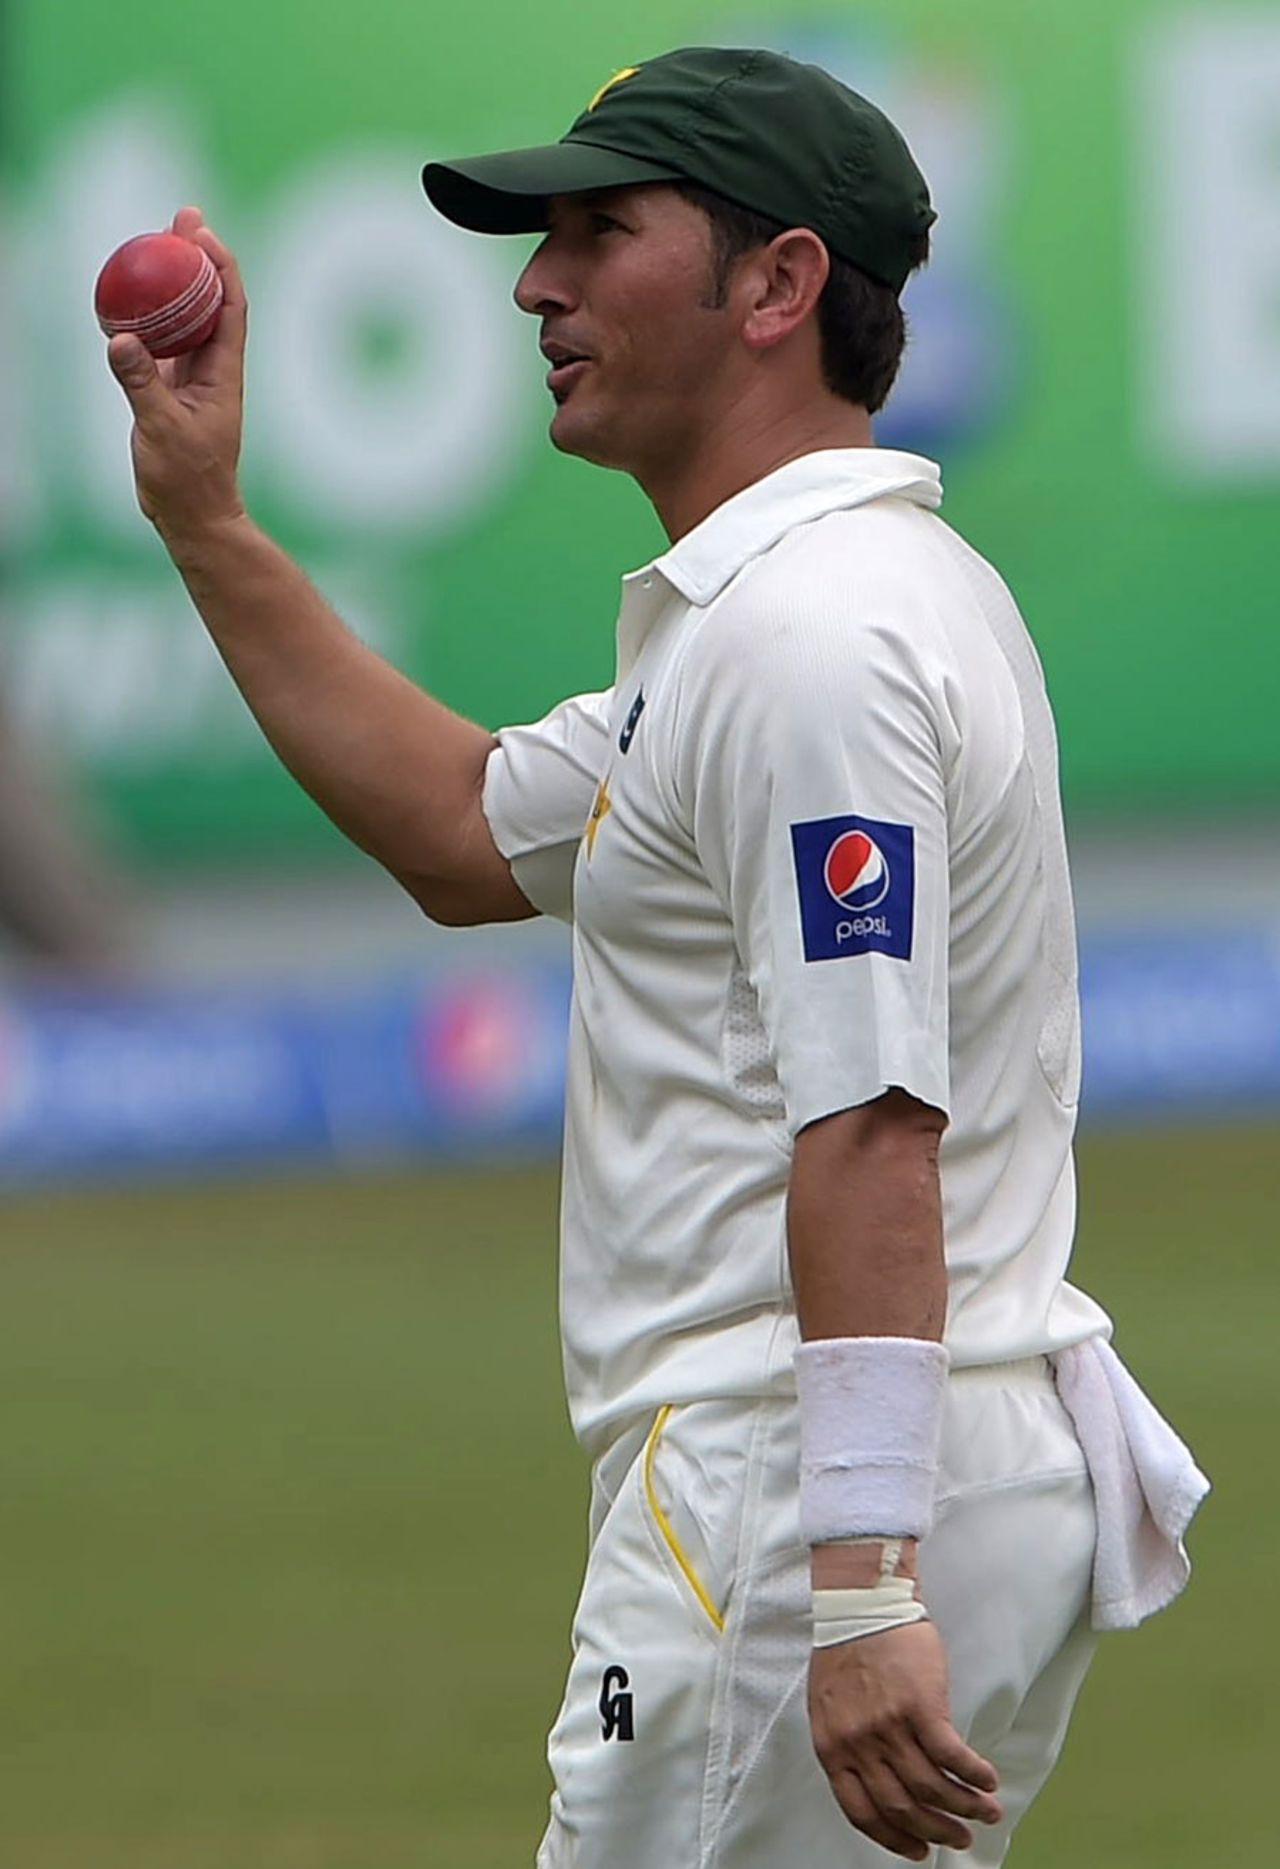 Yasir Shah walks back after claiming his maiden Test five-for, Pakistan v New Zealand, 2nd Test, Dubai, 5th day, November 21, 2014